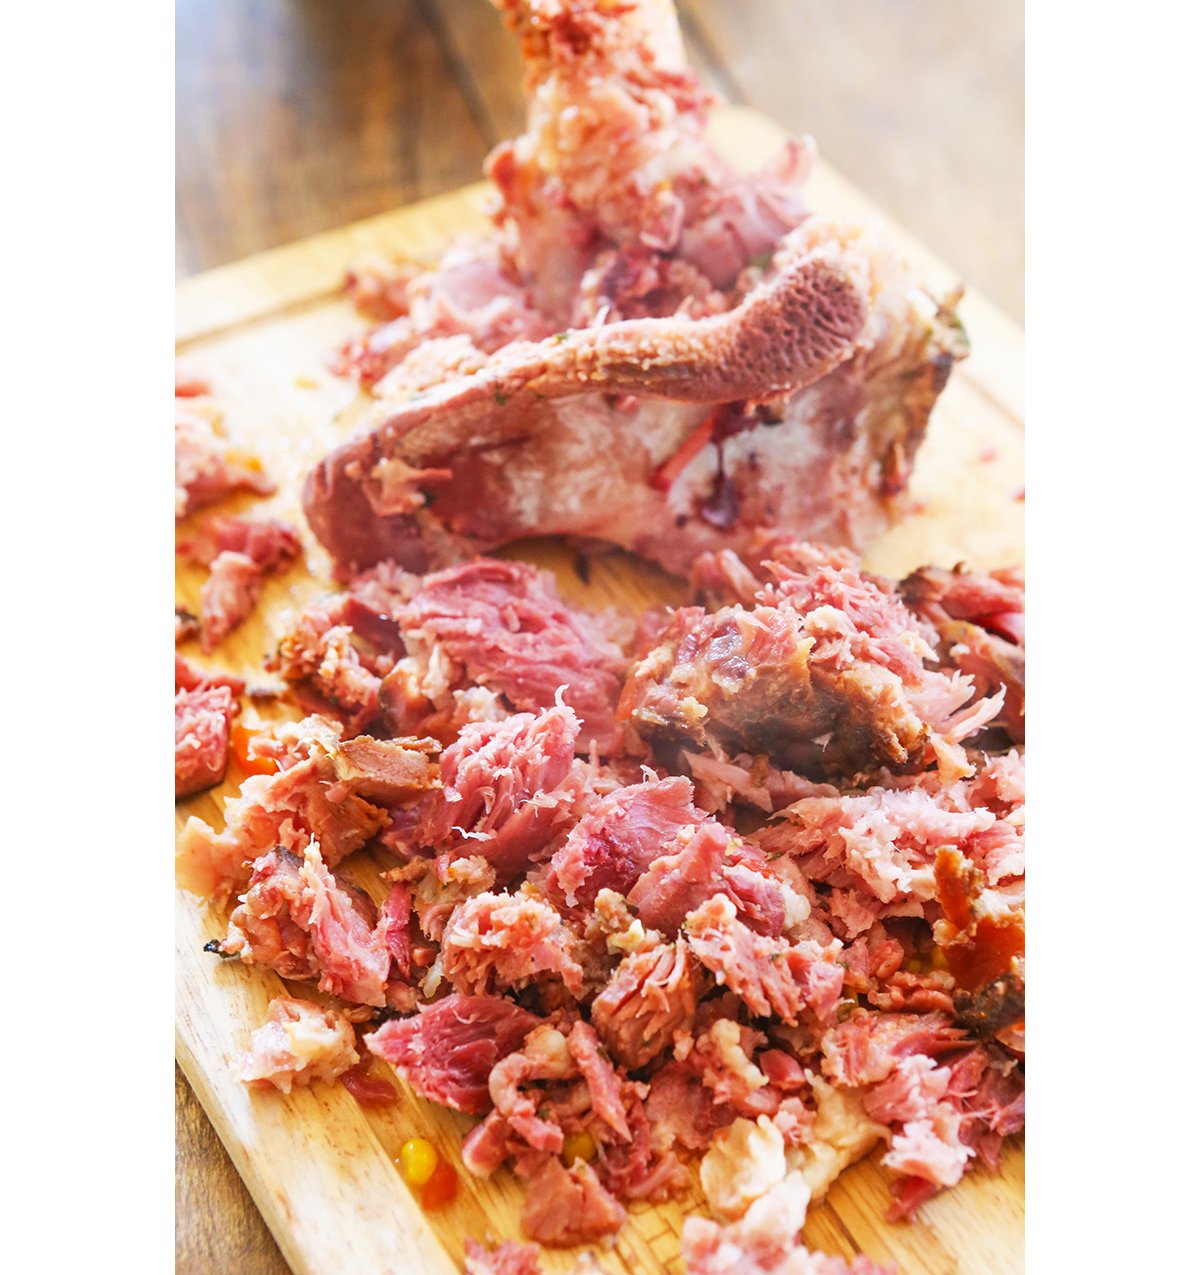 Ham bone on cutting board with meat removed.